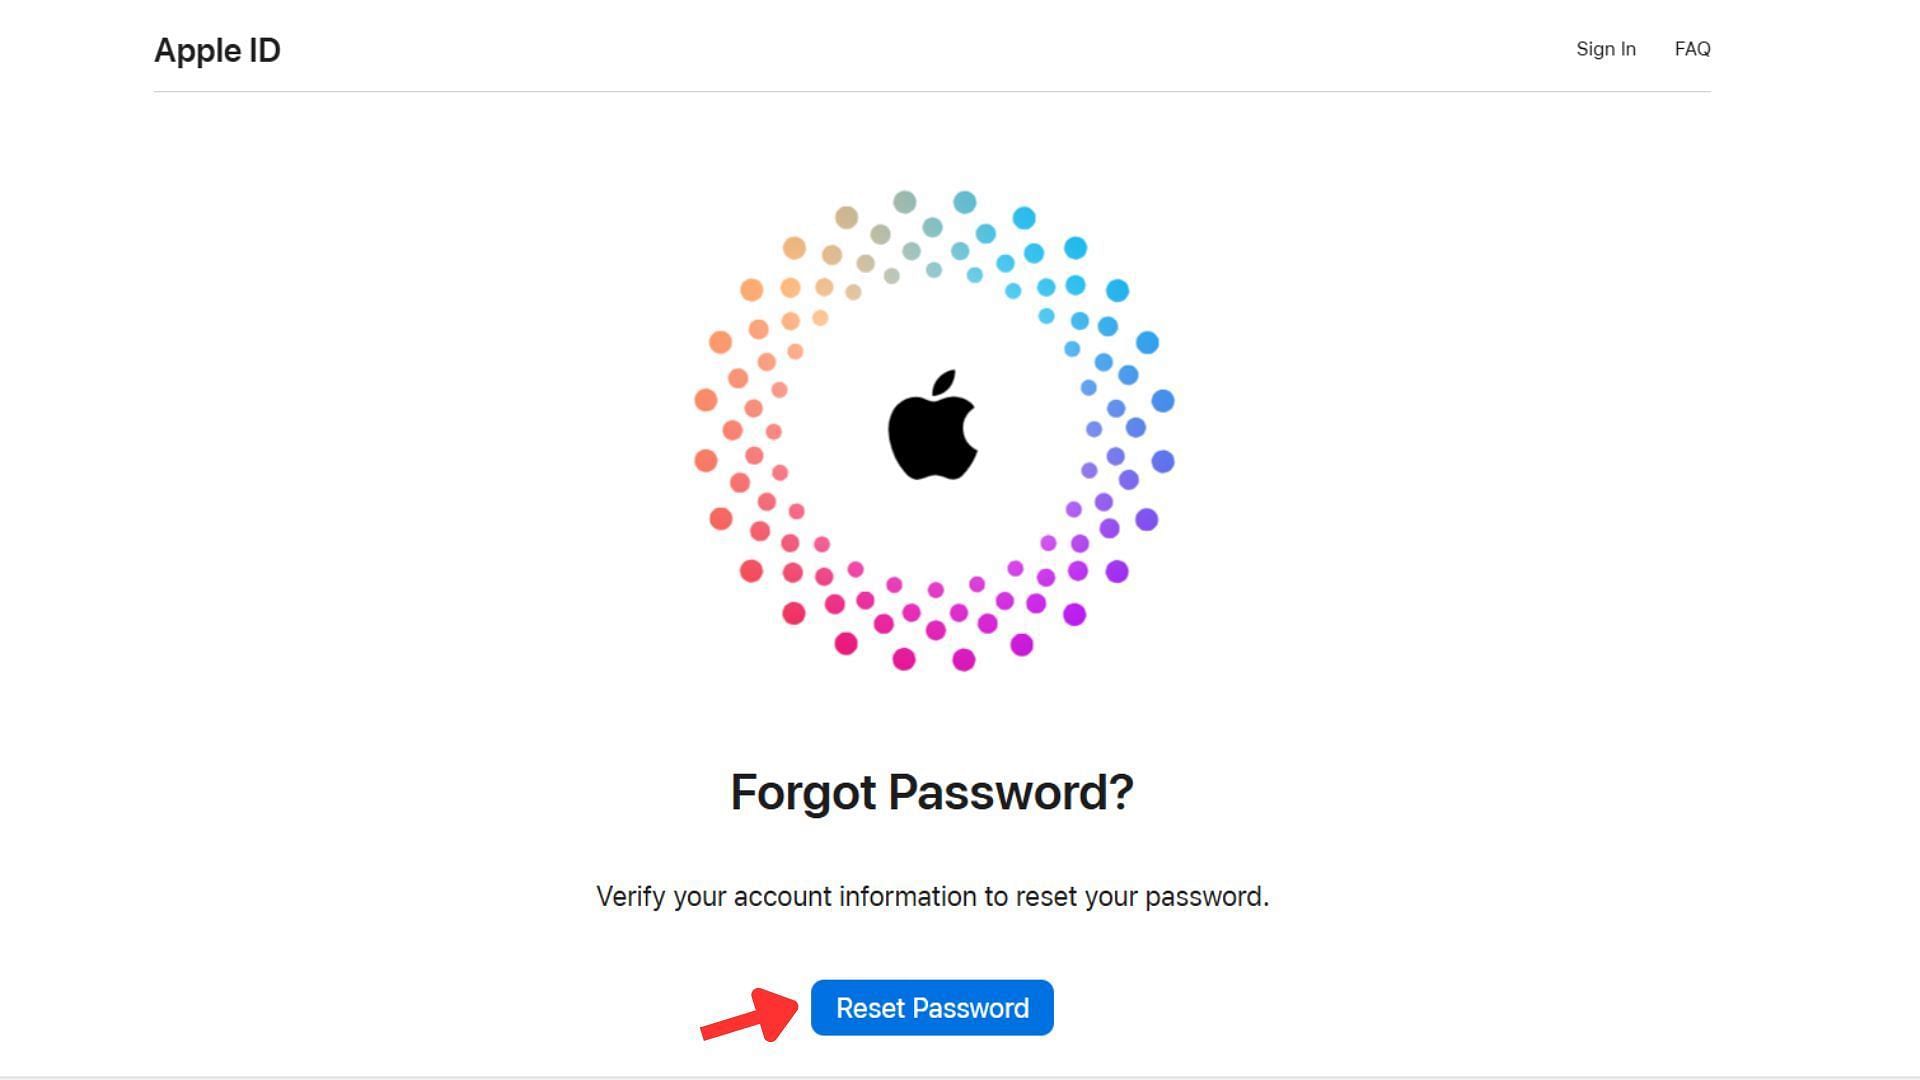 Resetting the password on the web (Image via Apple)